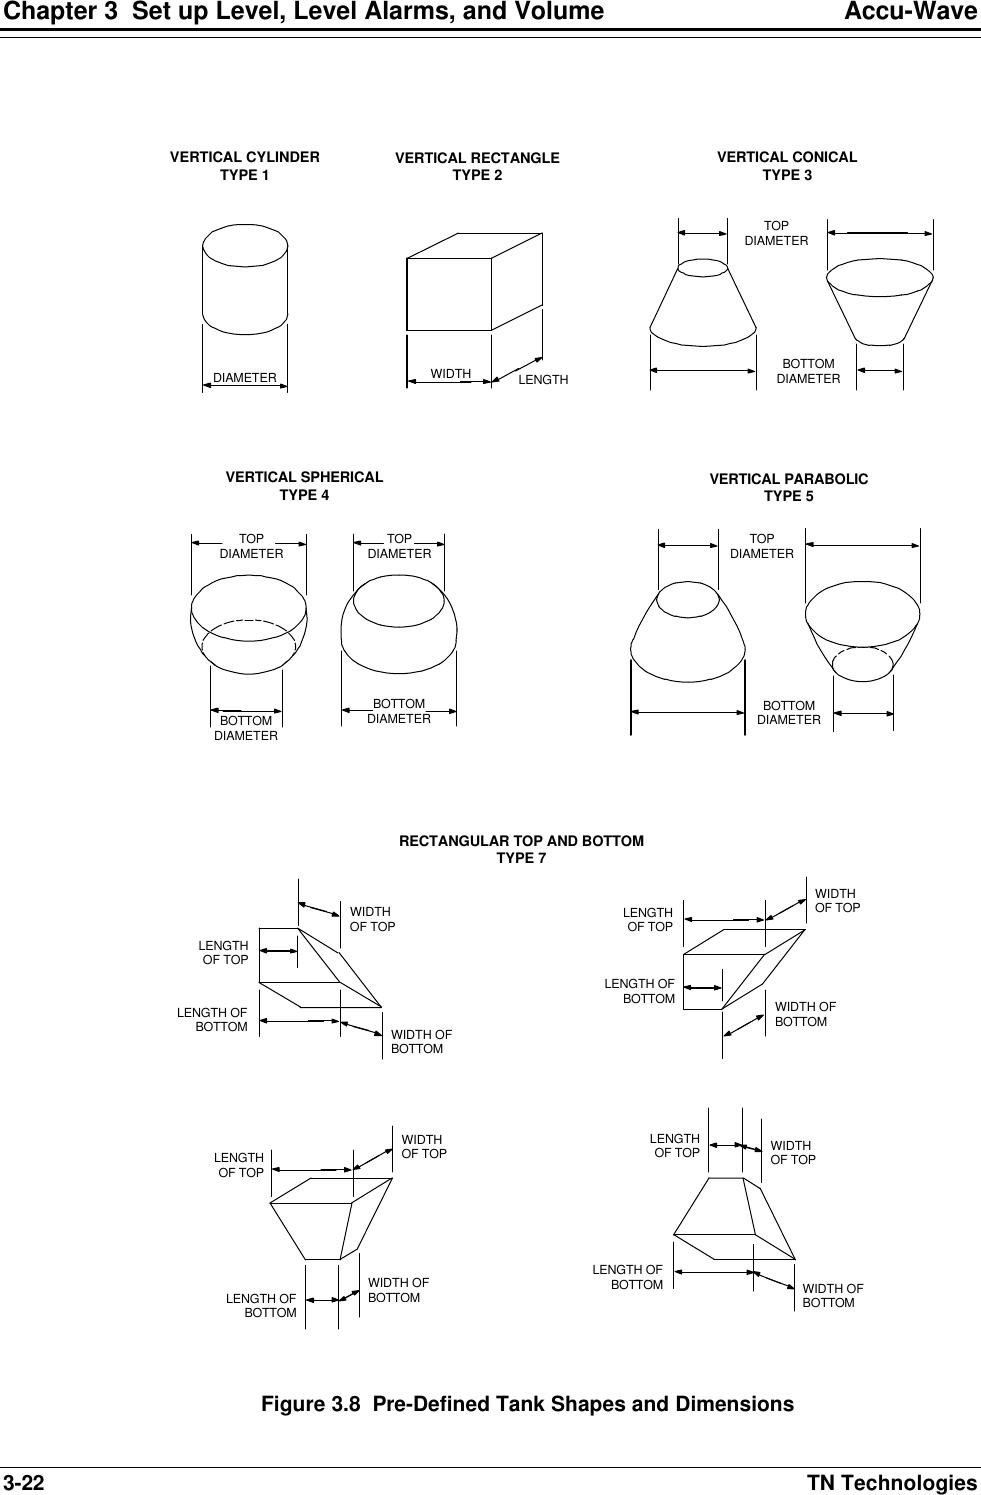 Chapter 3  Set up Level, Level Alarms, and Volume Accu-Wave 3-22 TN Technologies                            Figure 3.8  Pre-Defined Tank Shapes and Dimensions  VERTICAL CYLINDER TYPE 1 VERTICAL RECTANGLE TYPE 2 VERTICAL CONICAL TYPE 3  DIAMETER TOP DIAMETER BOTTOM DIAMETER WIDTH LENGTH VERTICAL PARABOLIC TYPE 5 VERTICAL SPHERICAL TYPE 4 TOP DIAMETER BOTTOM DIAMETER TOP DIAMETER BOTTOM DIAMETER BOTTOM DIAMETER TOP DIAMETER RECTANGULAR TOP AND BOTTOM TYPE 7 LENGTH OF BOTTOM WIDTH OF BOTTOM LENGTHOF TOPWIDTH OF TOP LENGTH OF TOP LENGTH OF BOTTOM WIDTH OF BOTTOM WIDTH OF TOP LENGTH OF BOTTOMWIDTH OF BOTTOM LENGTHOF TOPWIDTH OF TOP LENGTH OF BOTTOM WIDTH OF BOTTOM LENGTH OF TOP WIDTH OF TOP 